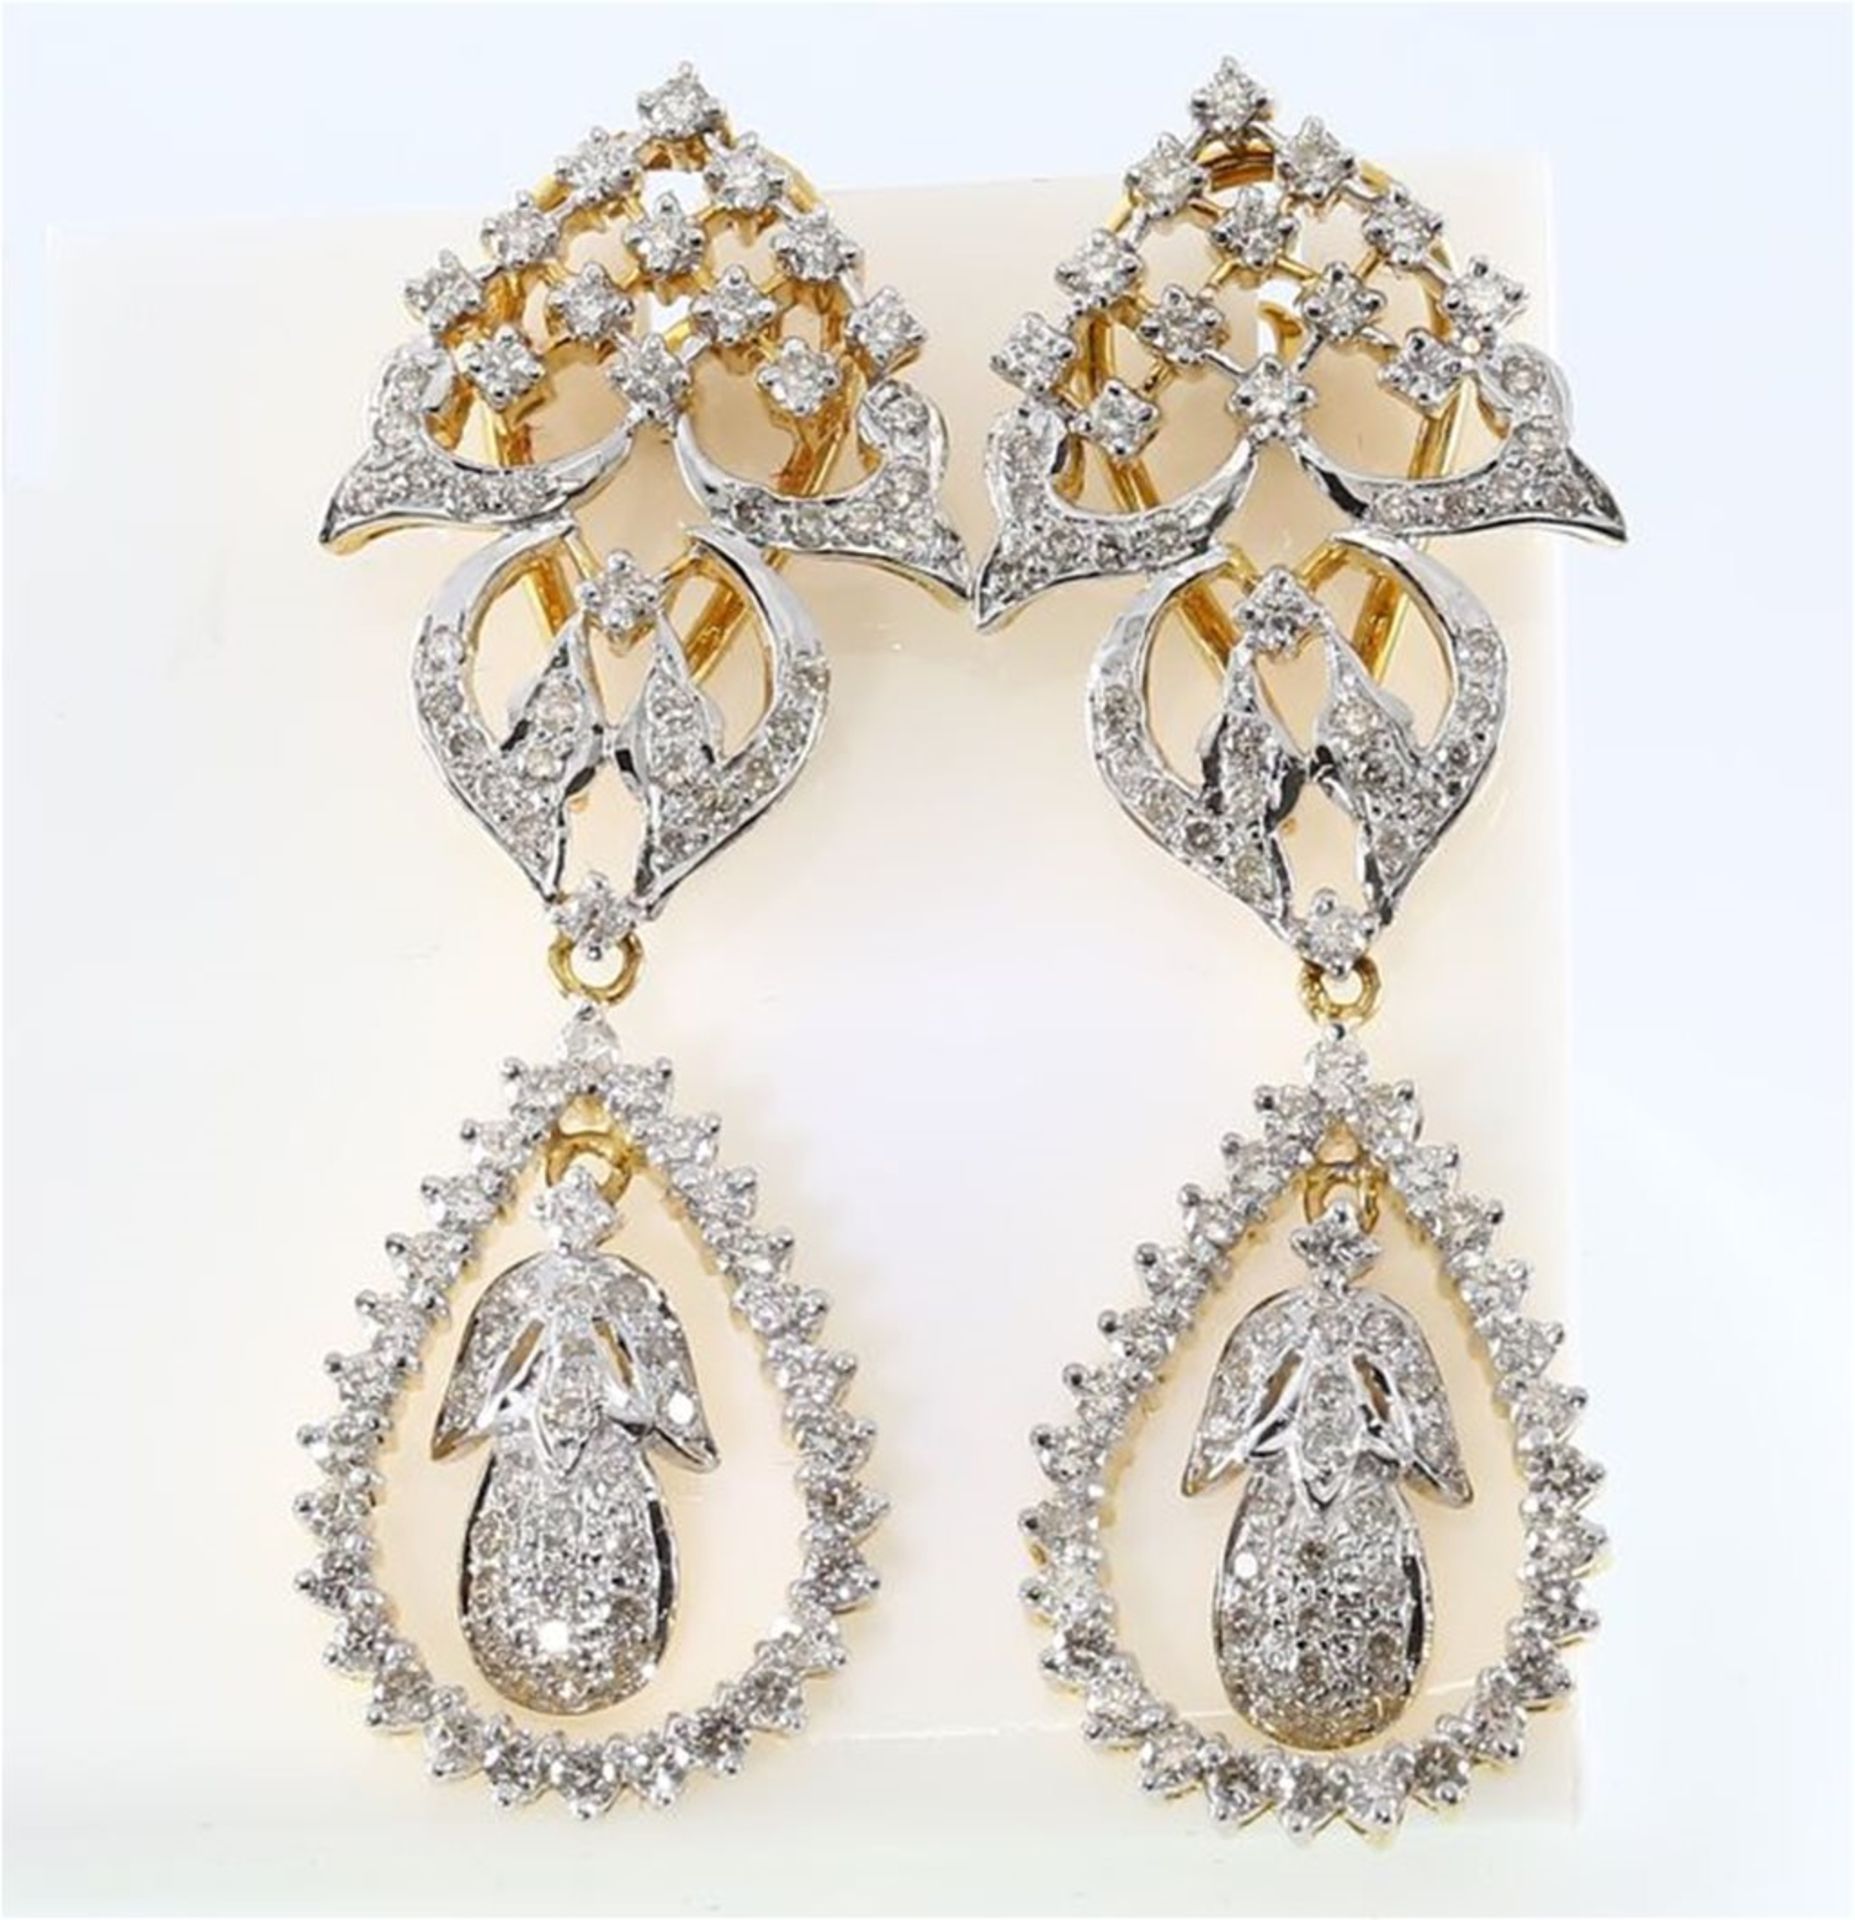 IGI Certified Large Yellow Gold Diamond Necklace with Chandelier Earrings - Image 2 of 9